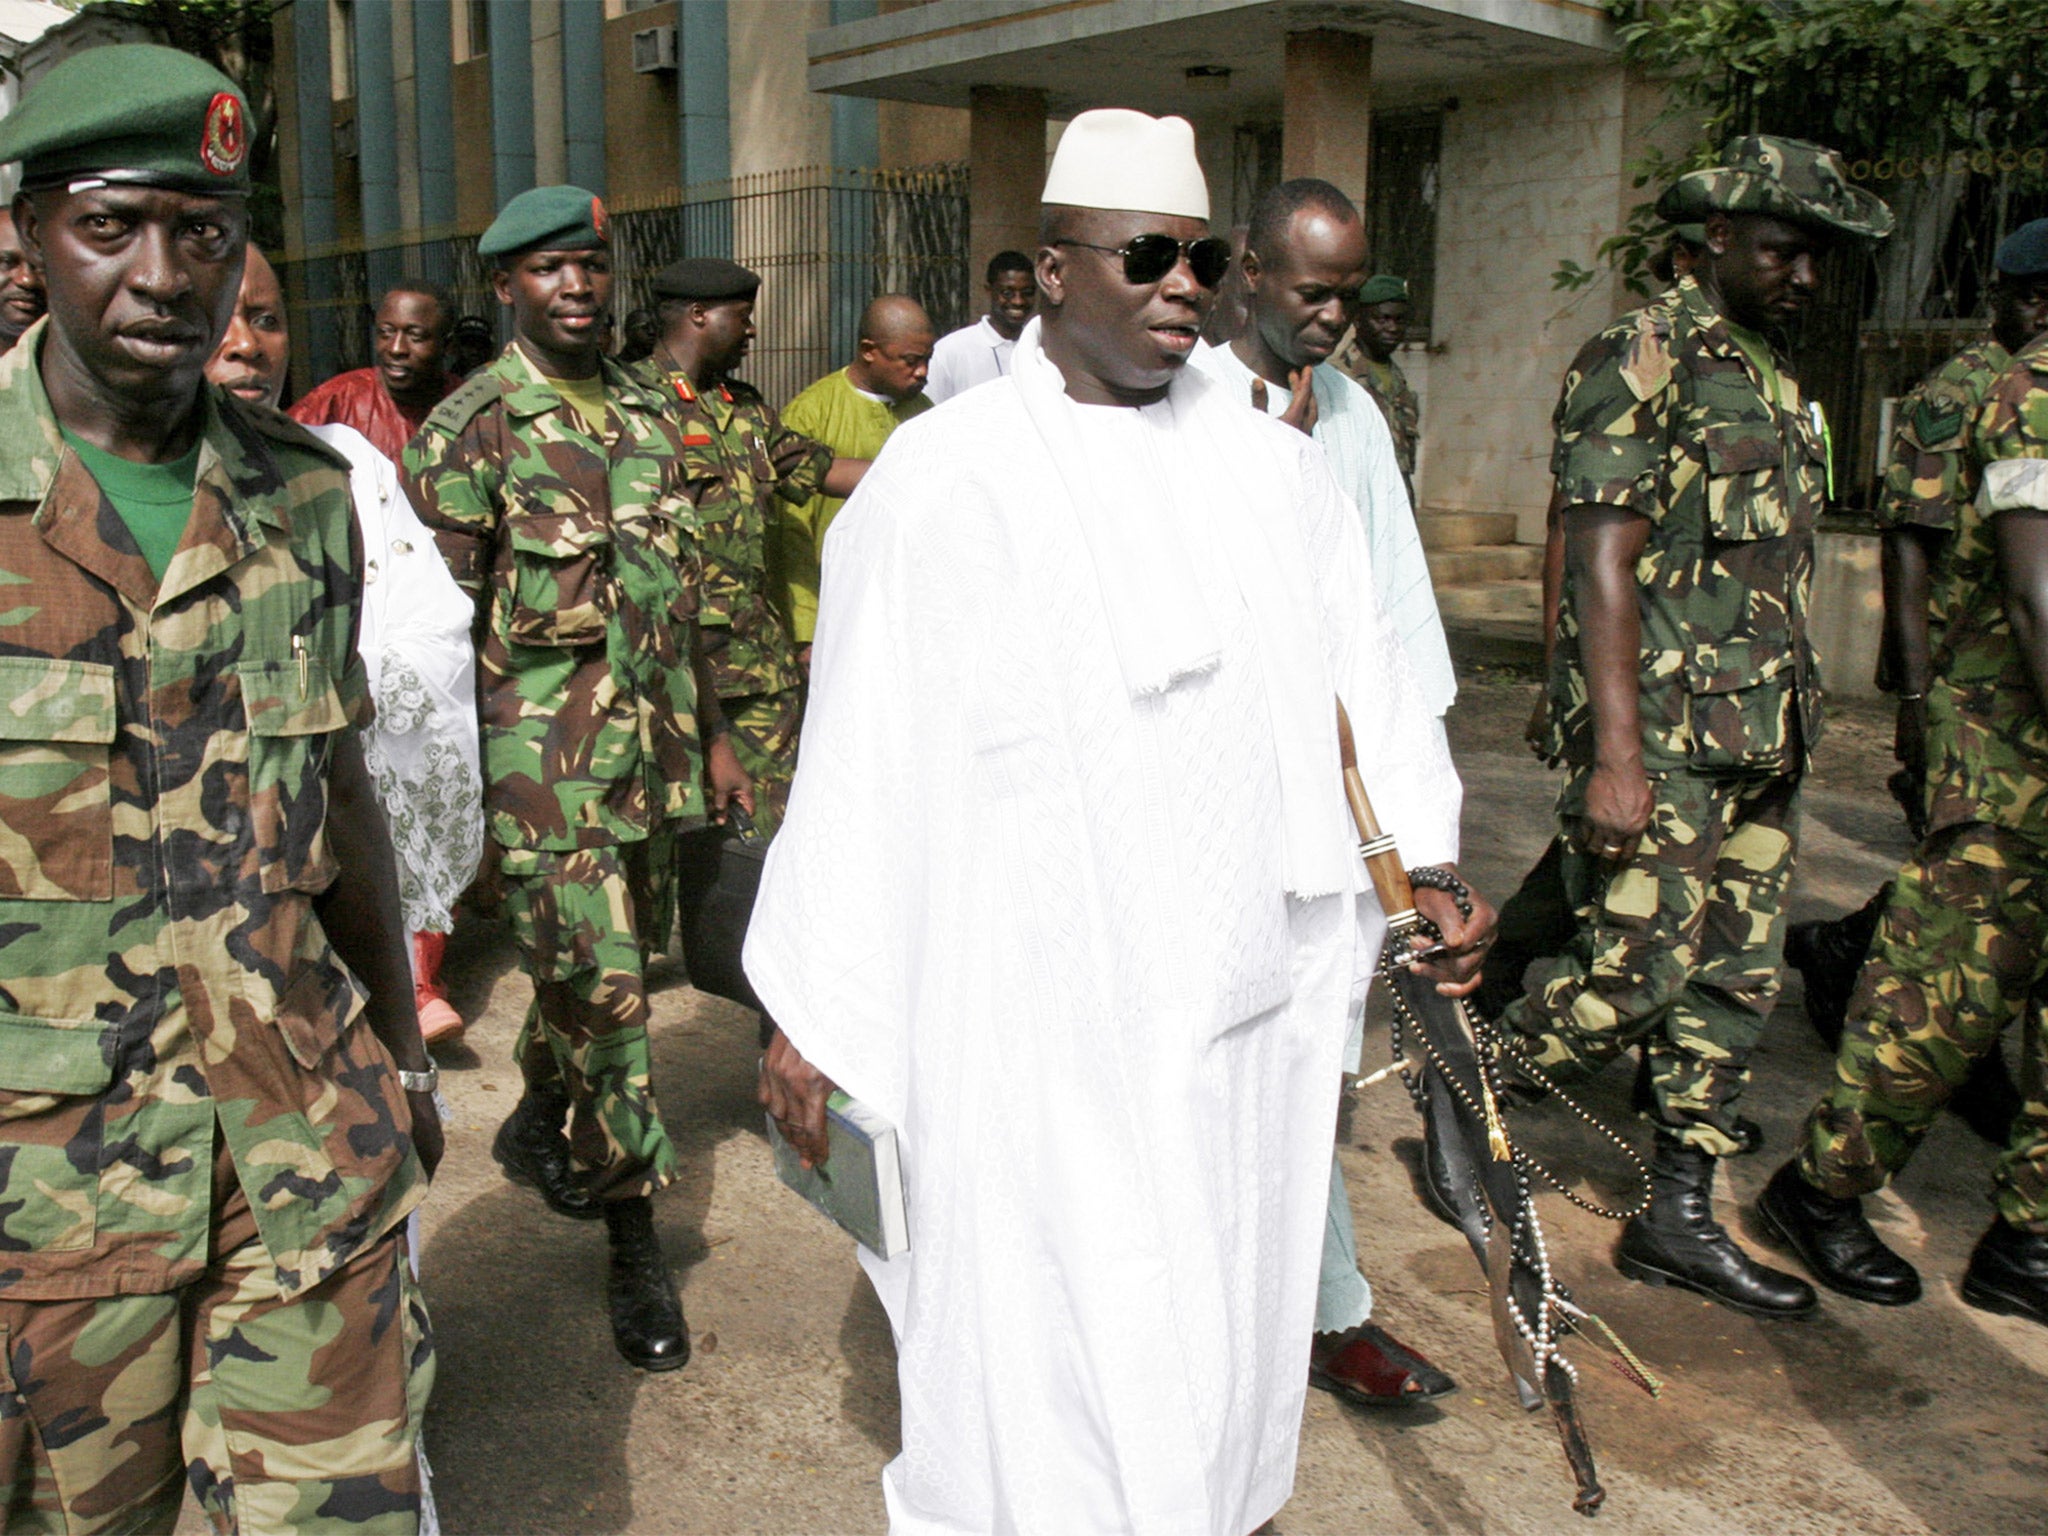 President Yahya Jammeh, then a young army lieutenant, overthrew The Gambia’s first president, Sir Dawda Kairaba Jawara, in a 1994 coup